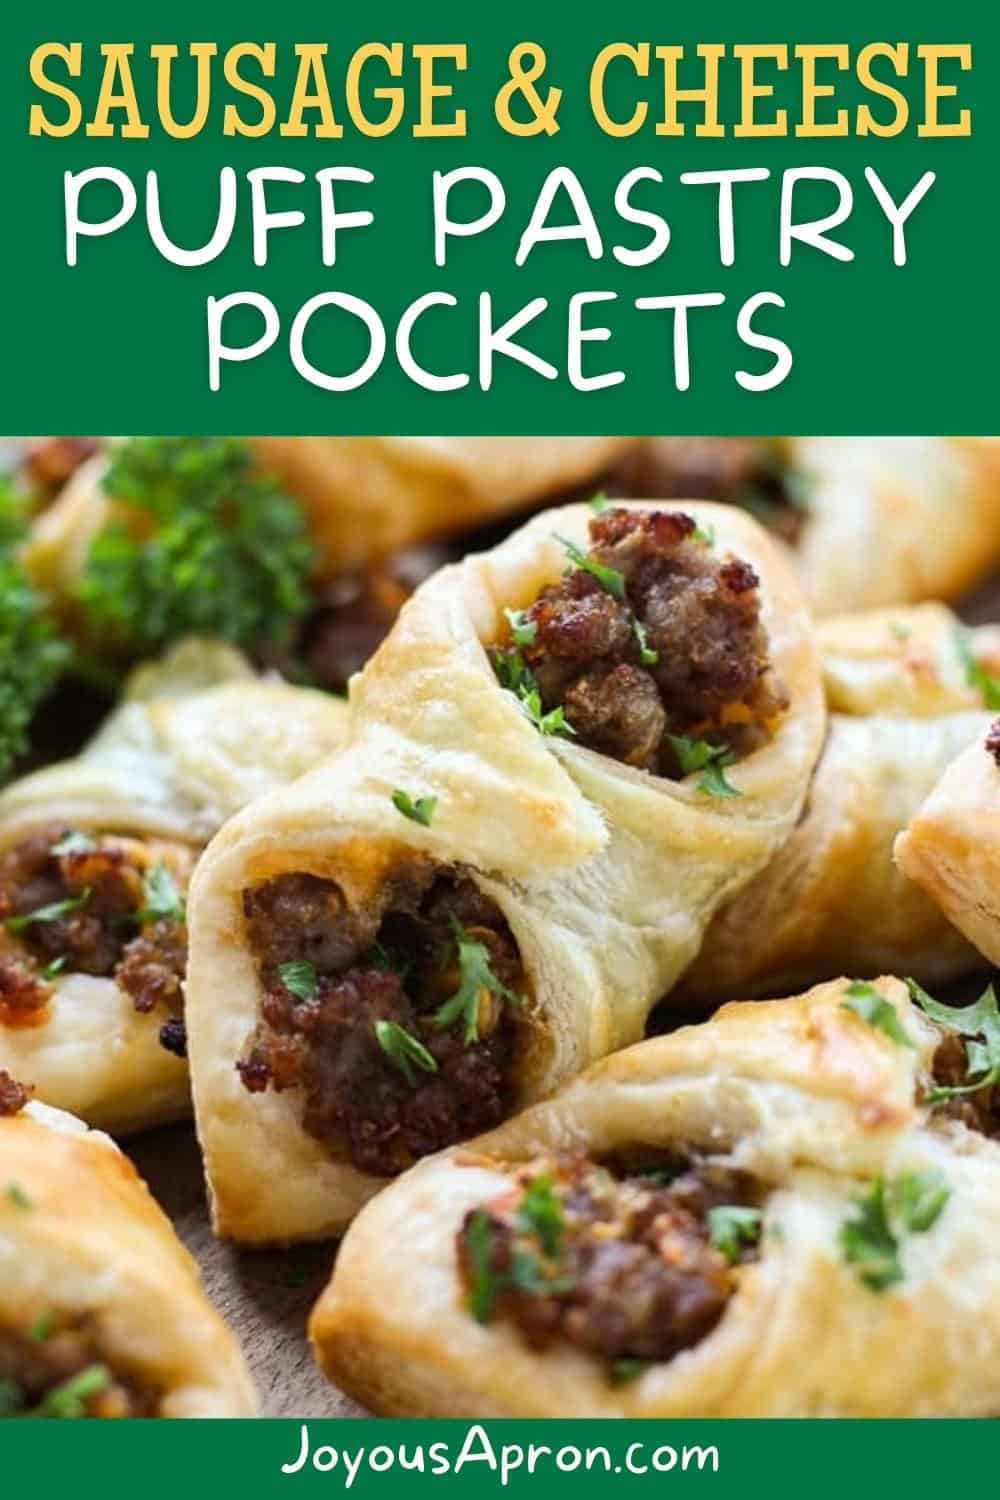 Sausage and Cheese Puff Pastry Pockets - easy appetizer, snack or even breakfast! Crumbly sausage and cheese wrapped in a buttery, flaky puff pastry. Perfect finger food for parties, game day, showers and holidays! via @joyousapron